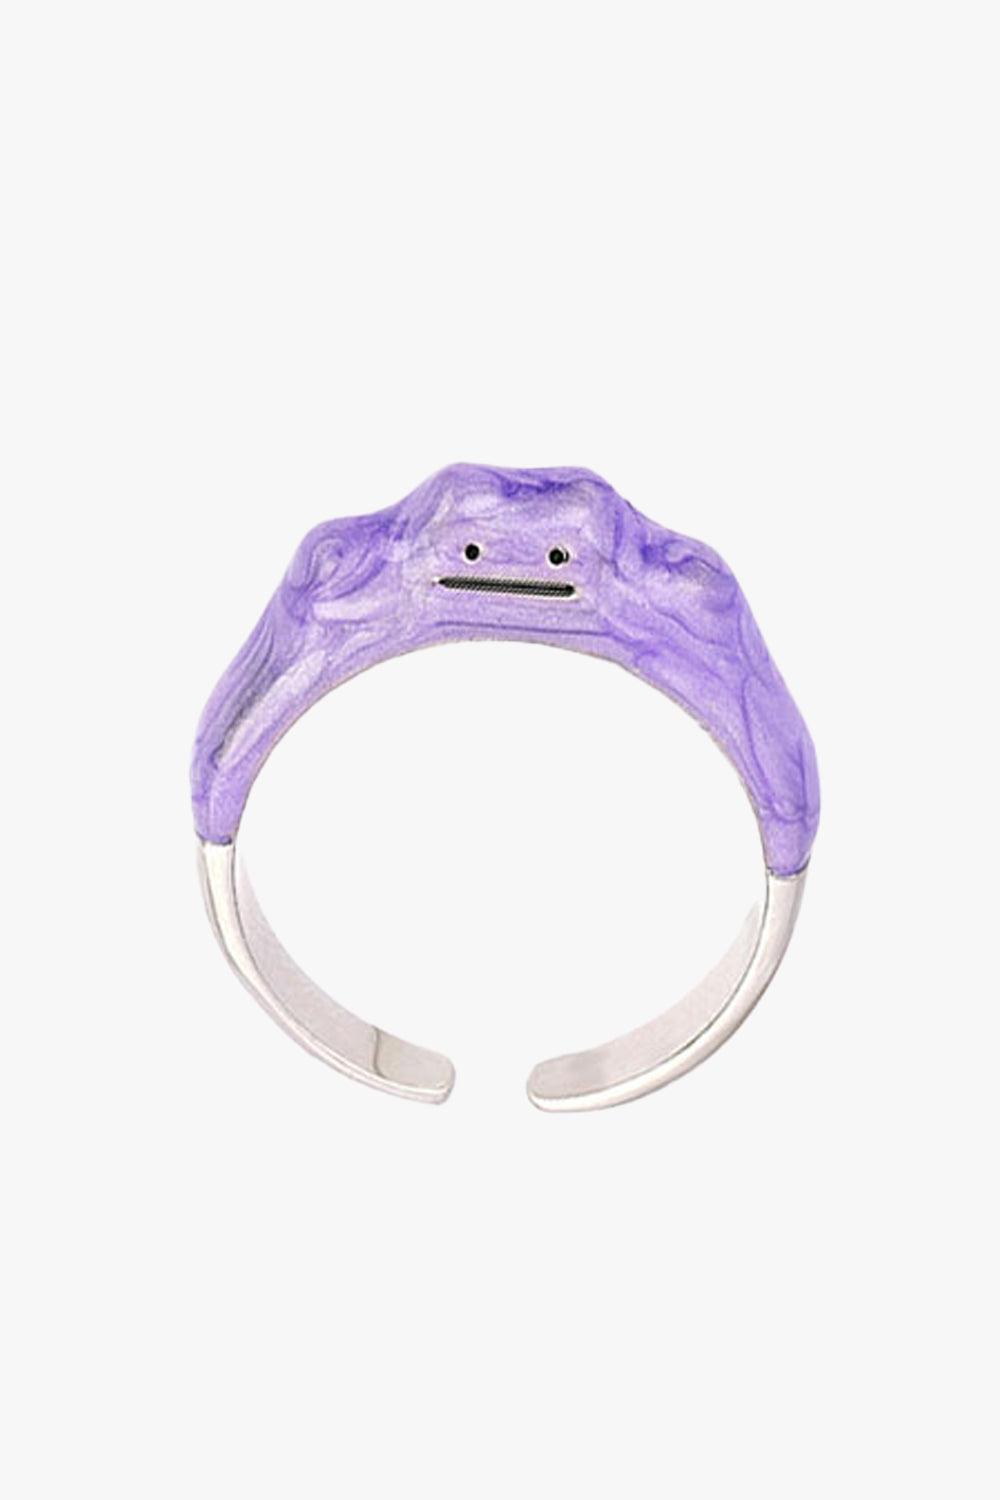 Purple Slime Aesthetic Ring - Aesthetic Clothes Shop